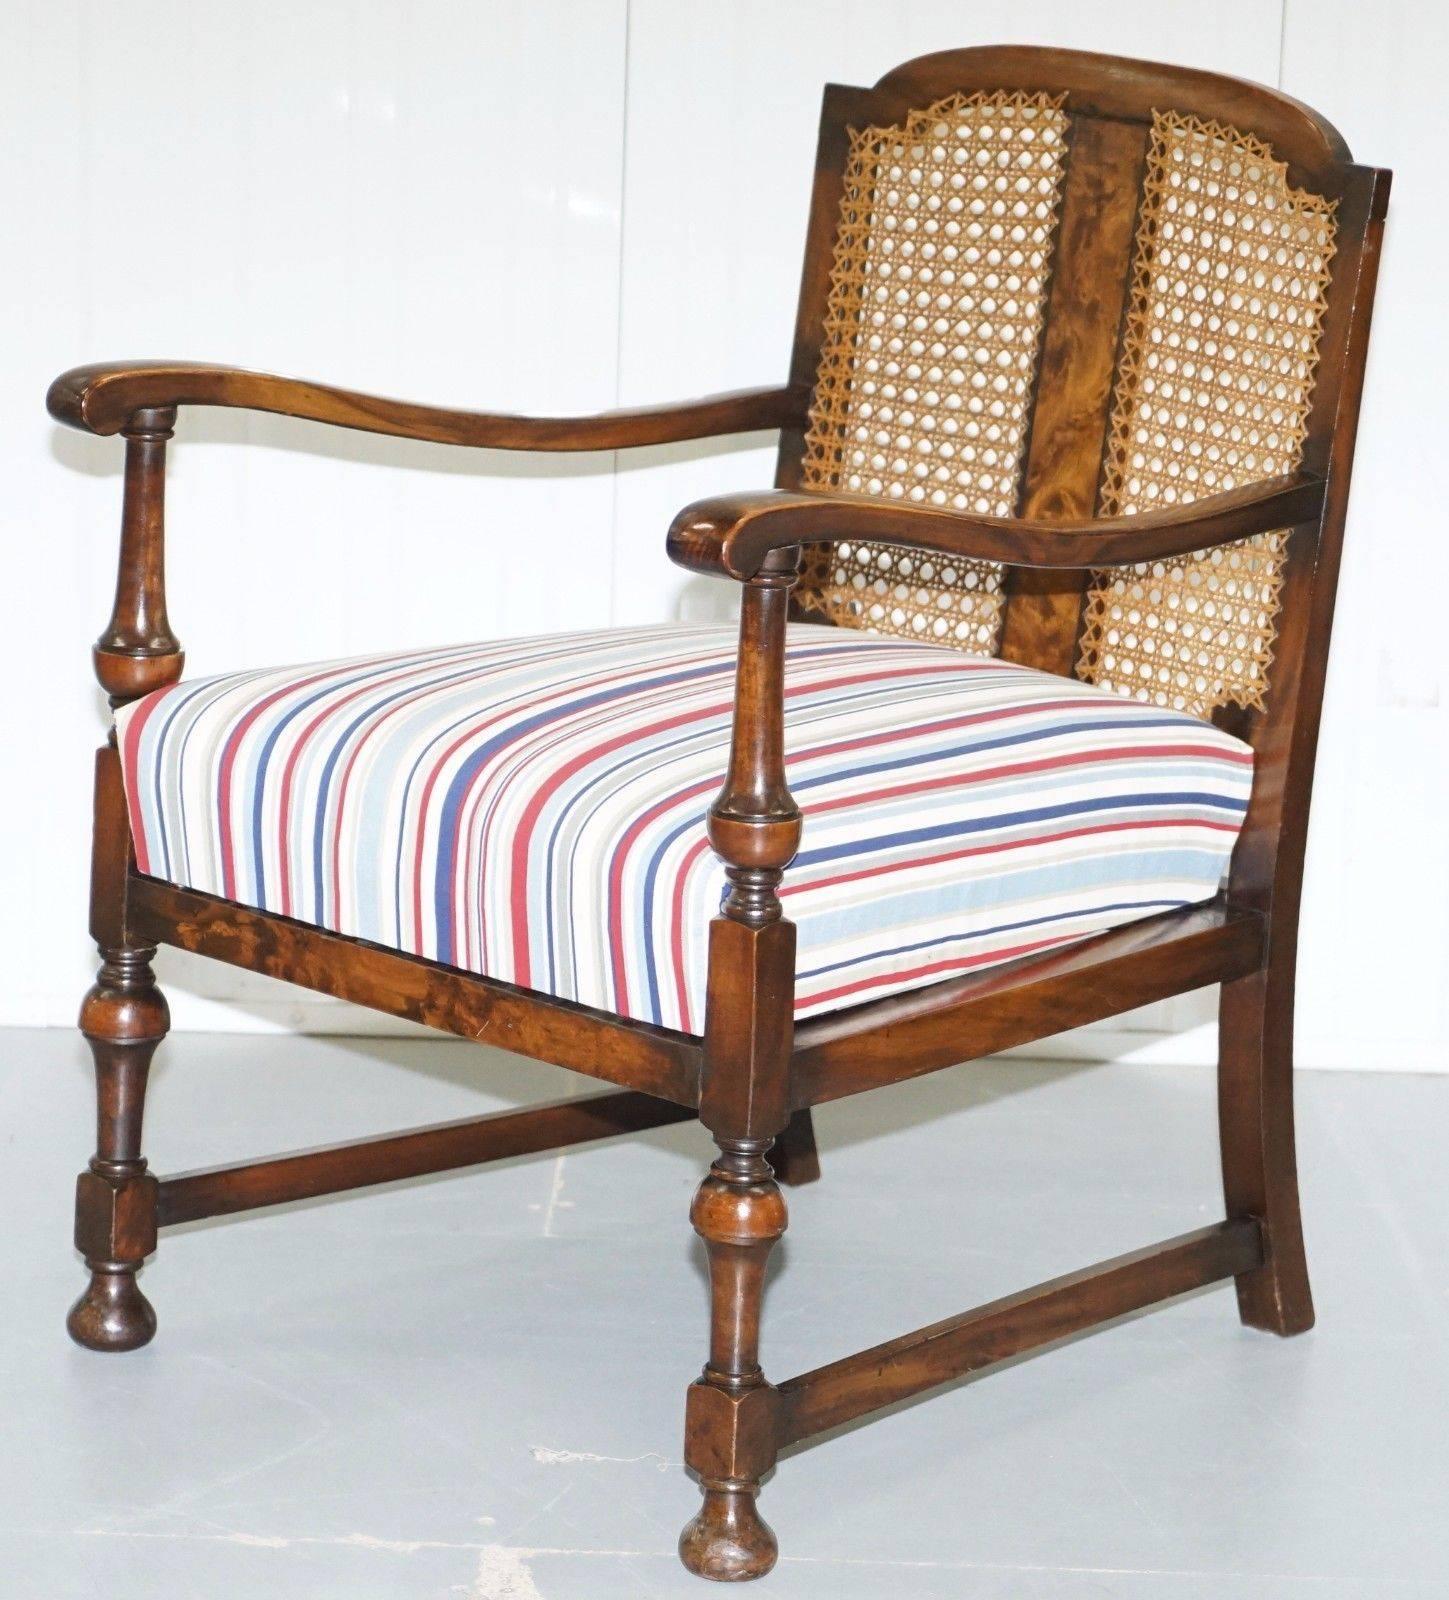 Edwardian Vintage Suite Walnut & Cane Armchair and Bench Sofa Liberty William Morris Style